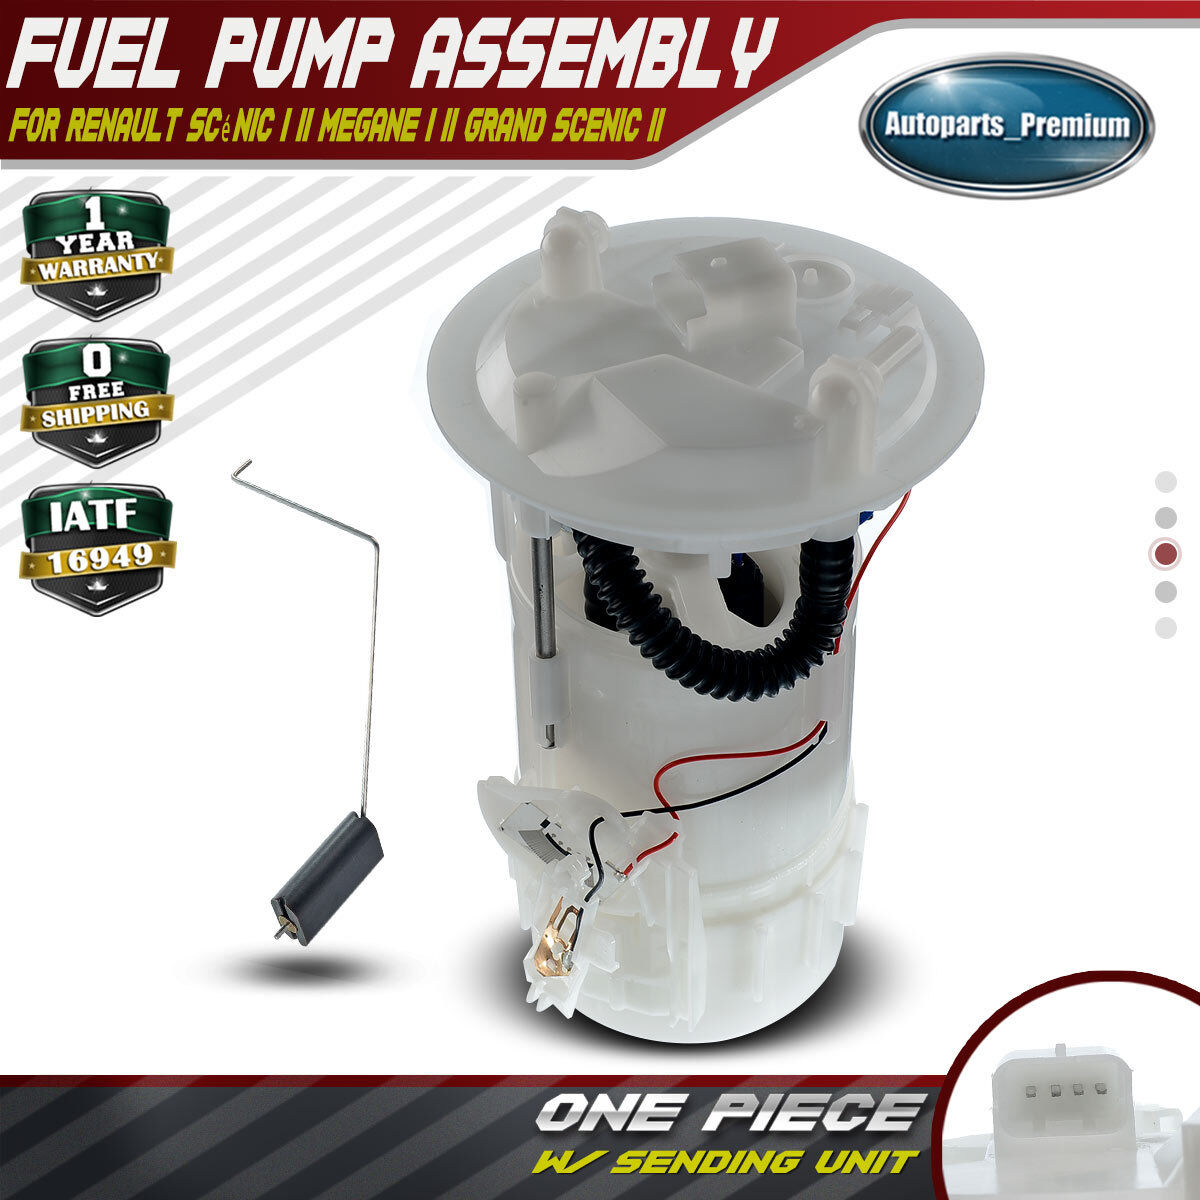 Fuel Pump Module Assembly For Renault Scénic I Megane II Grand Scénic II 02-09